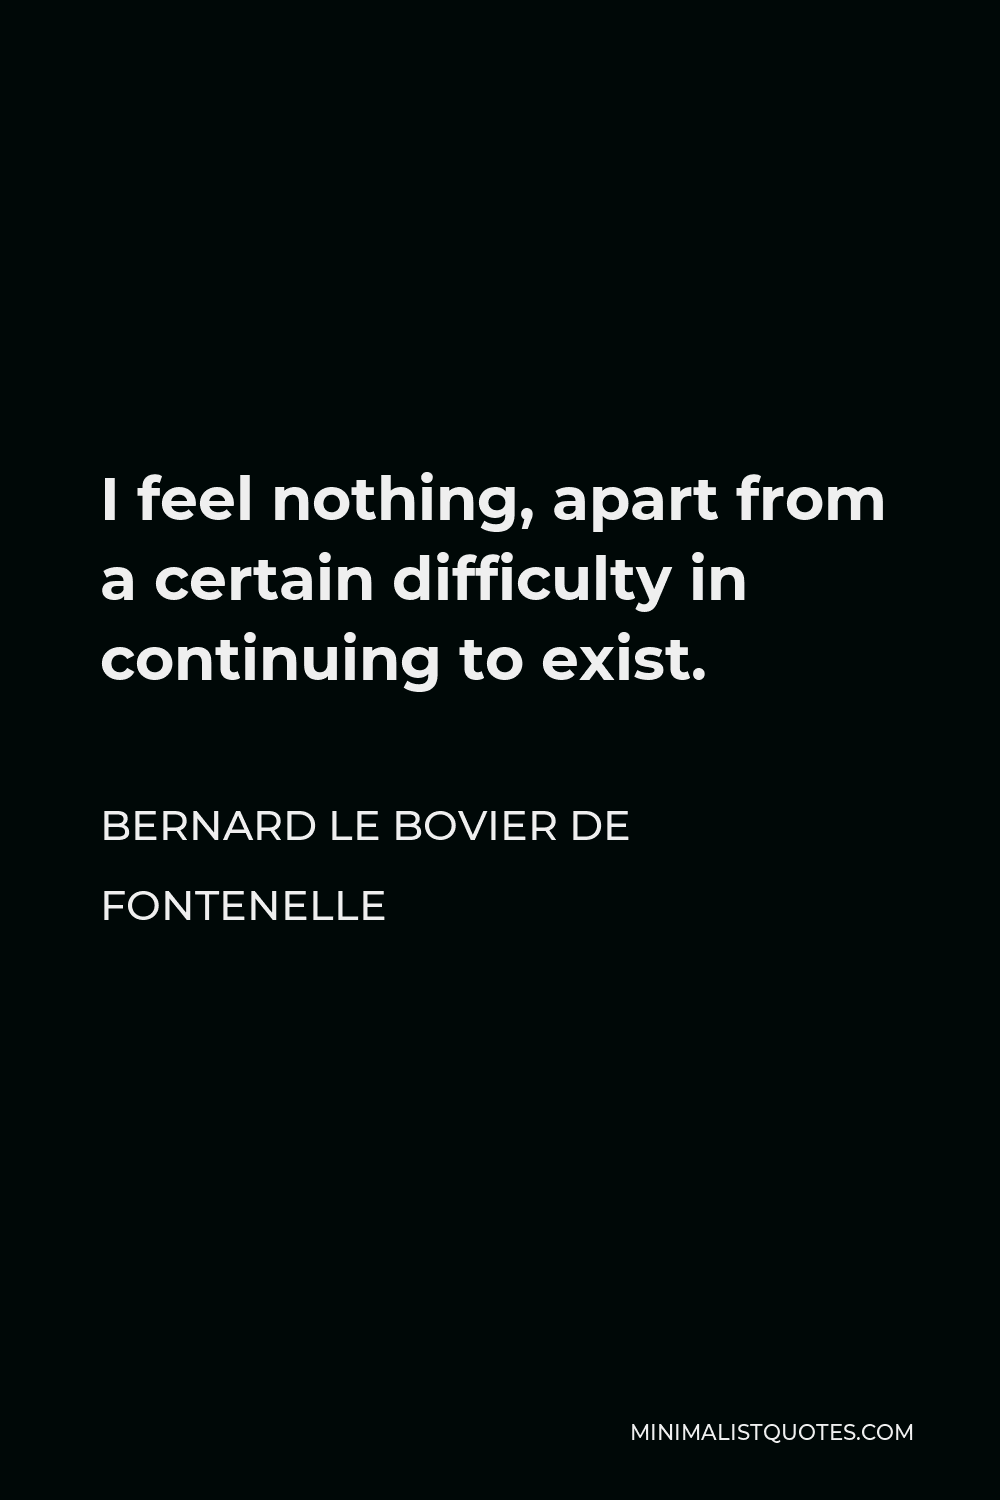 Bernard le Bovier de Fontenelle Quote - I feel nothing, apart from a certain difficulty in continuing to exist.